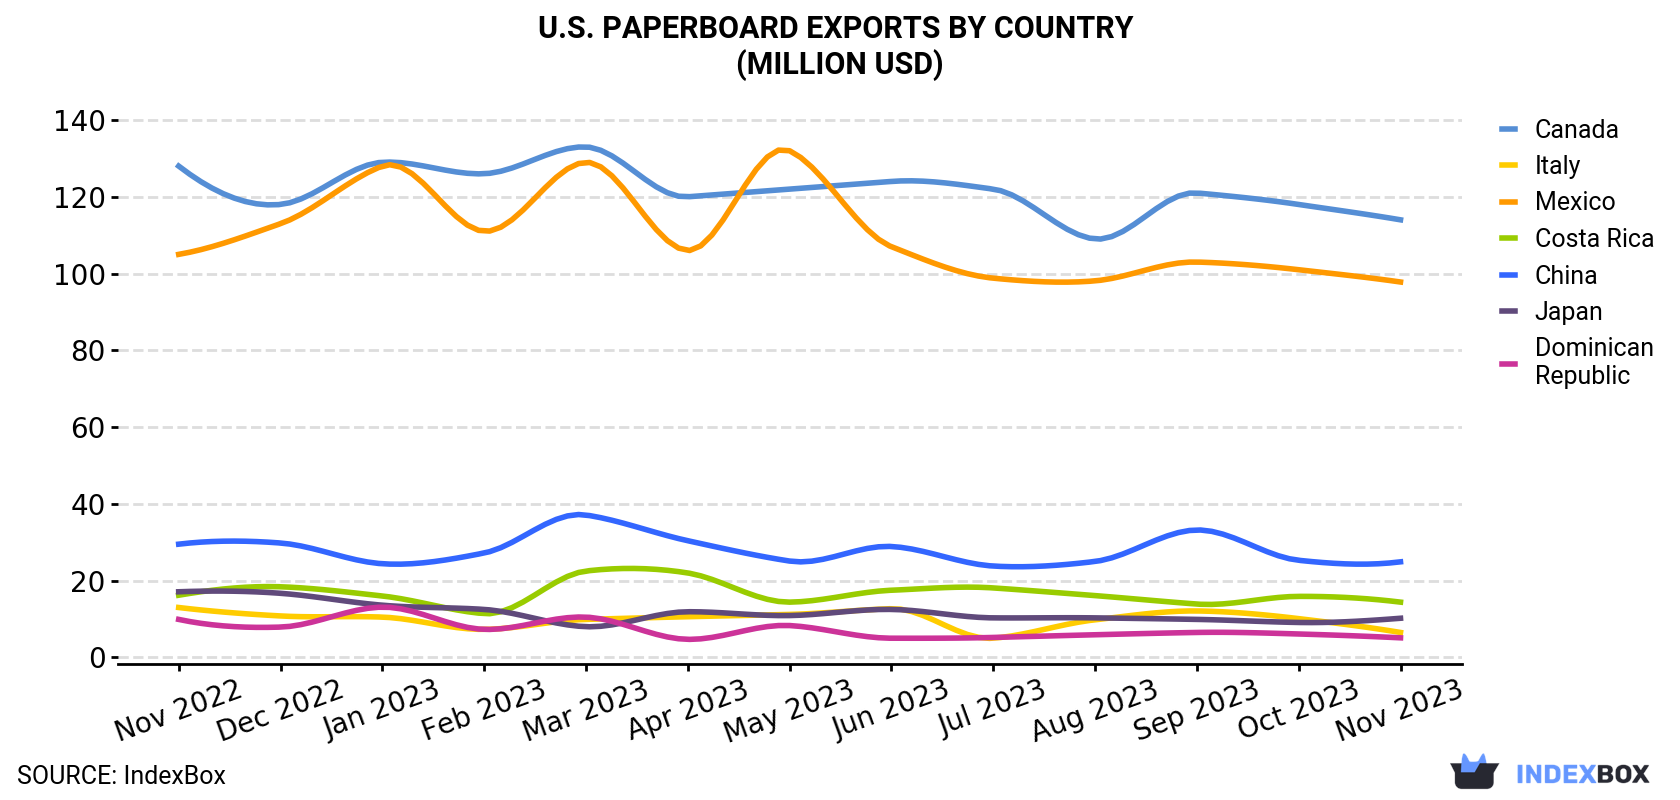 U.S. Paperboard Exports By Country (Million USD)